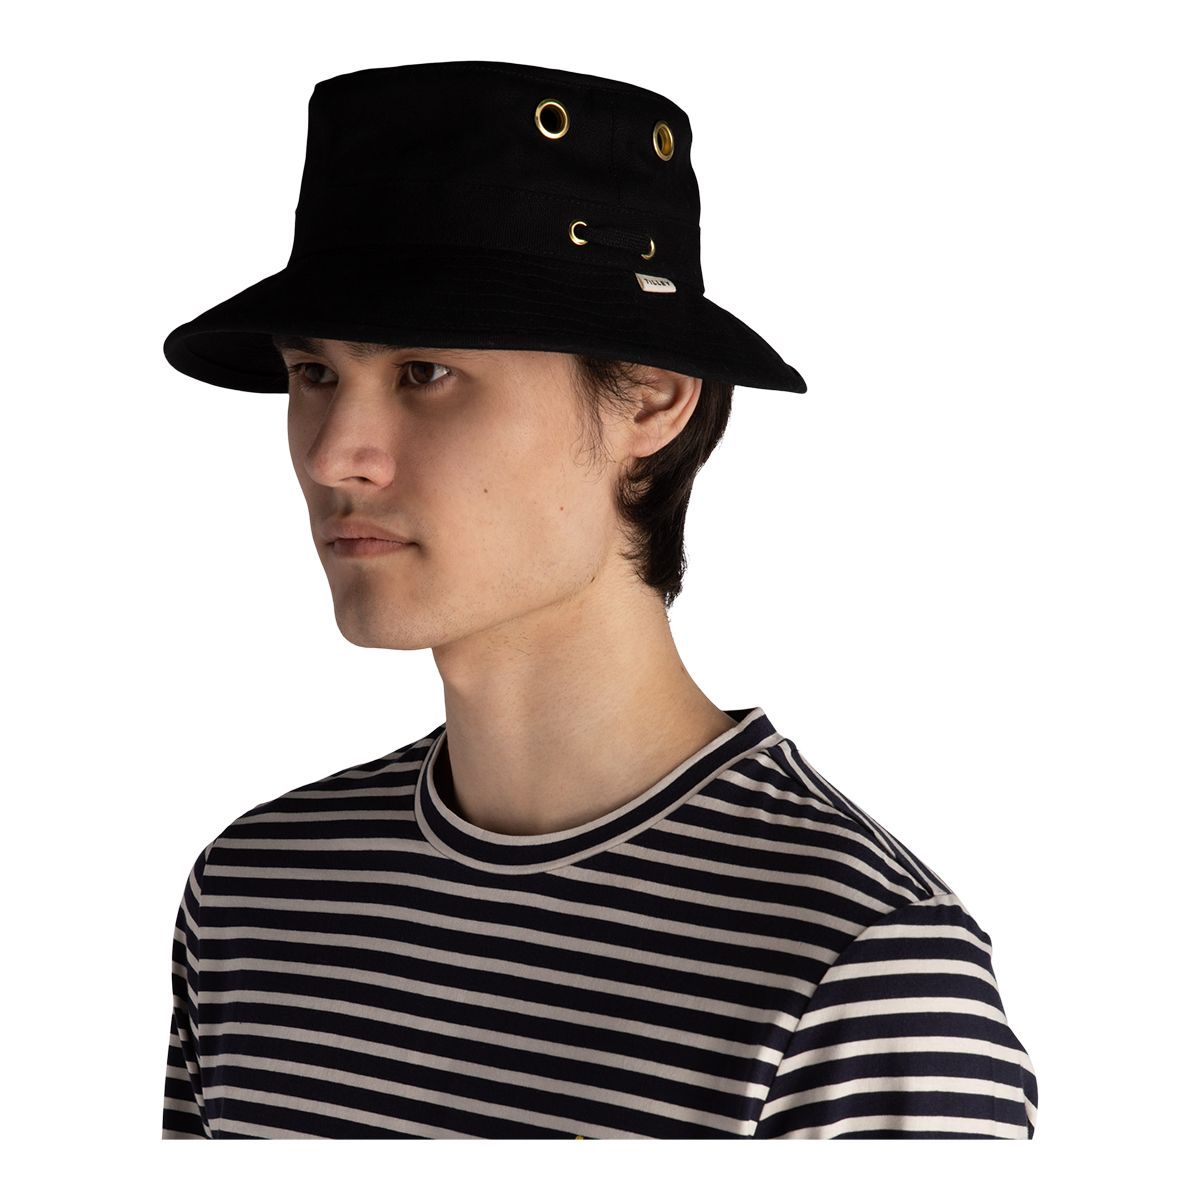 https://media-www.atmosphere.ca/product/div-03-softgoods/dpt-79-clothing-accessories/sdpt-01-mens/334093562/tilley-t1-bucket-hat-323-blk-97ab69cb-9638-421b-a247-d6521e595fee-jpgrendition.jpg?imdensity=1&imwidth=1244&impolicy=mZoom